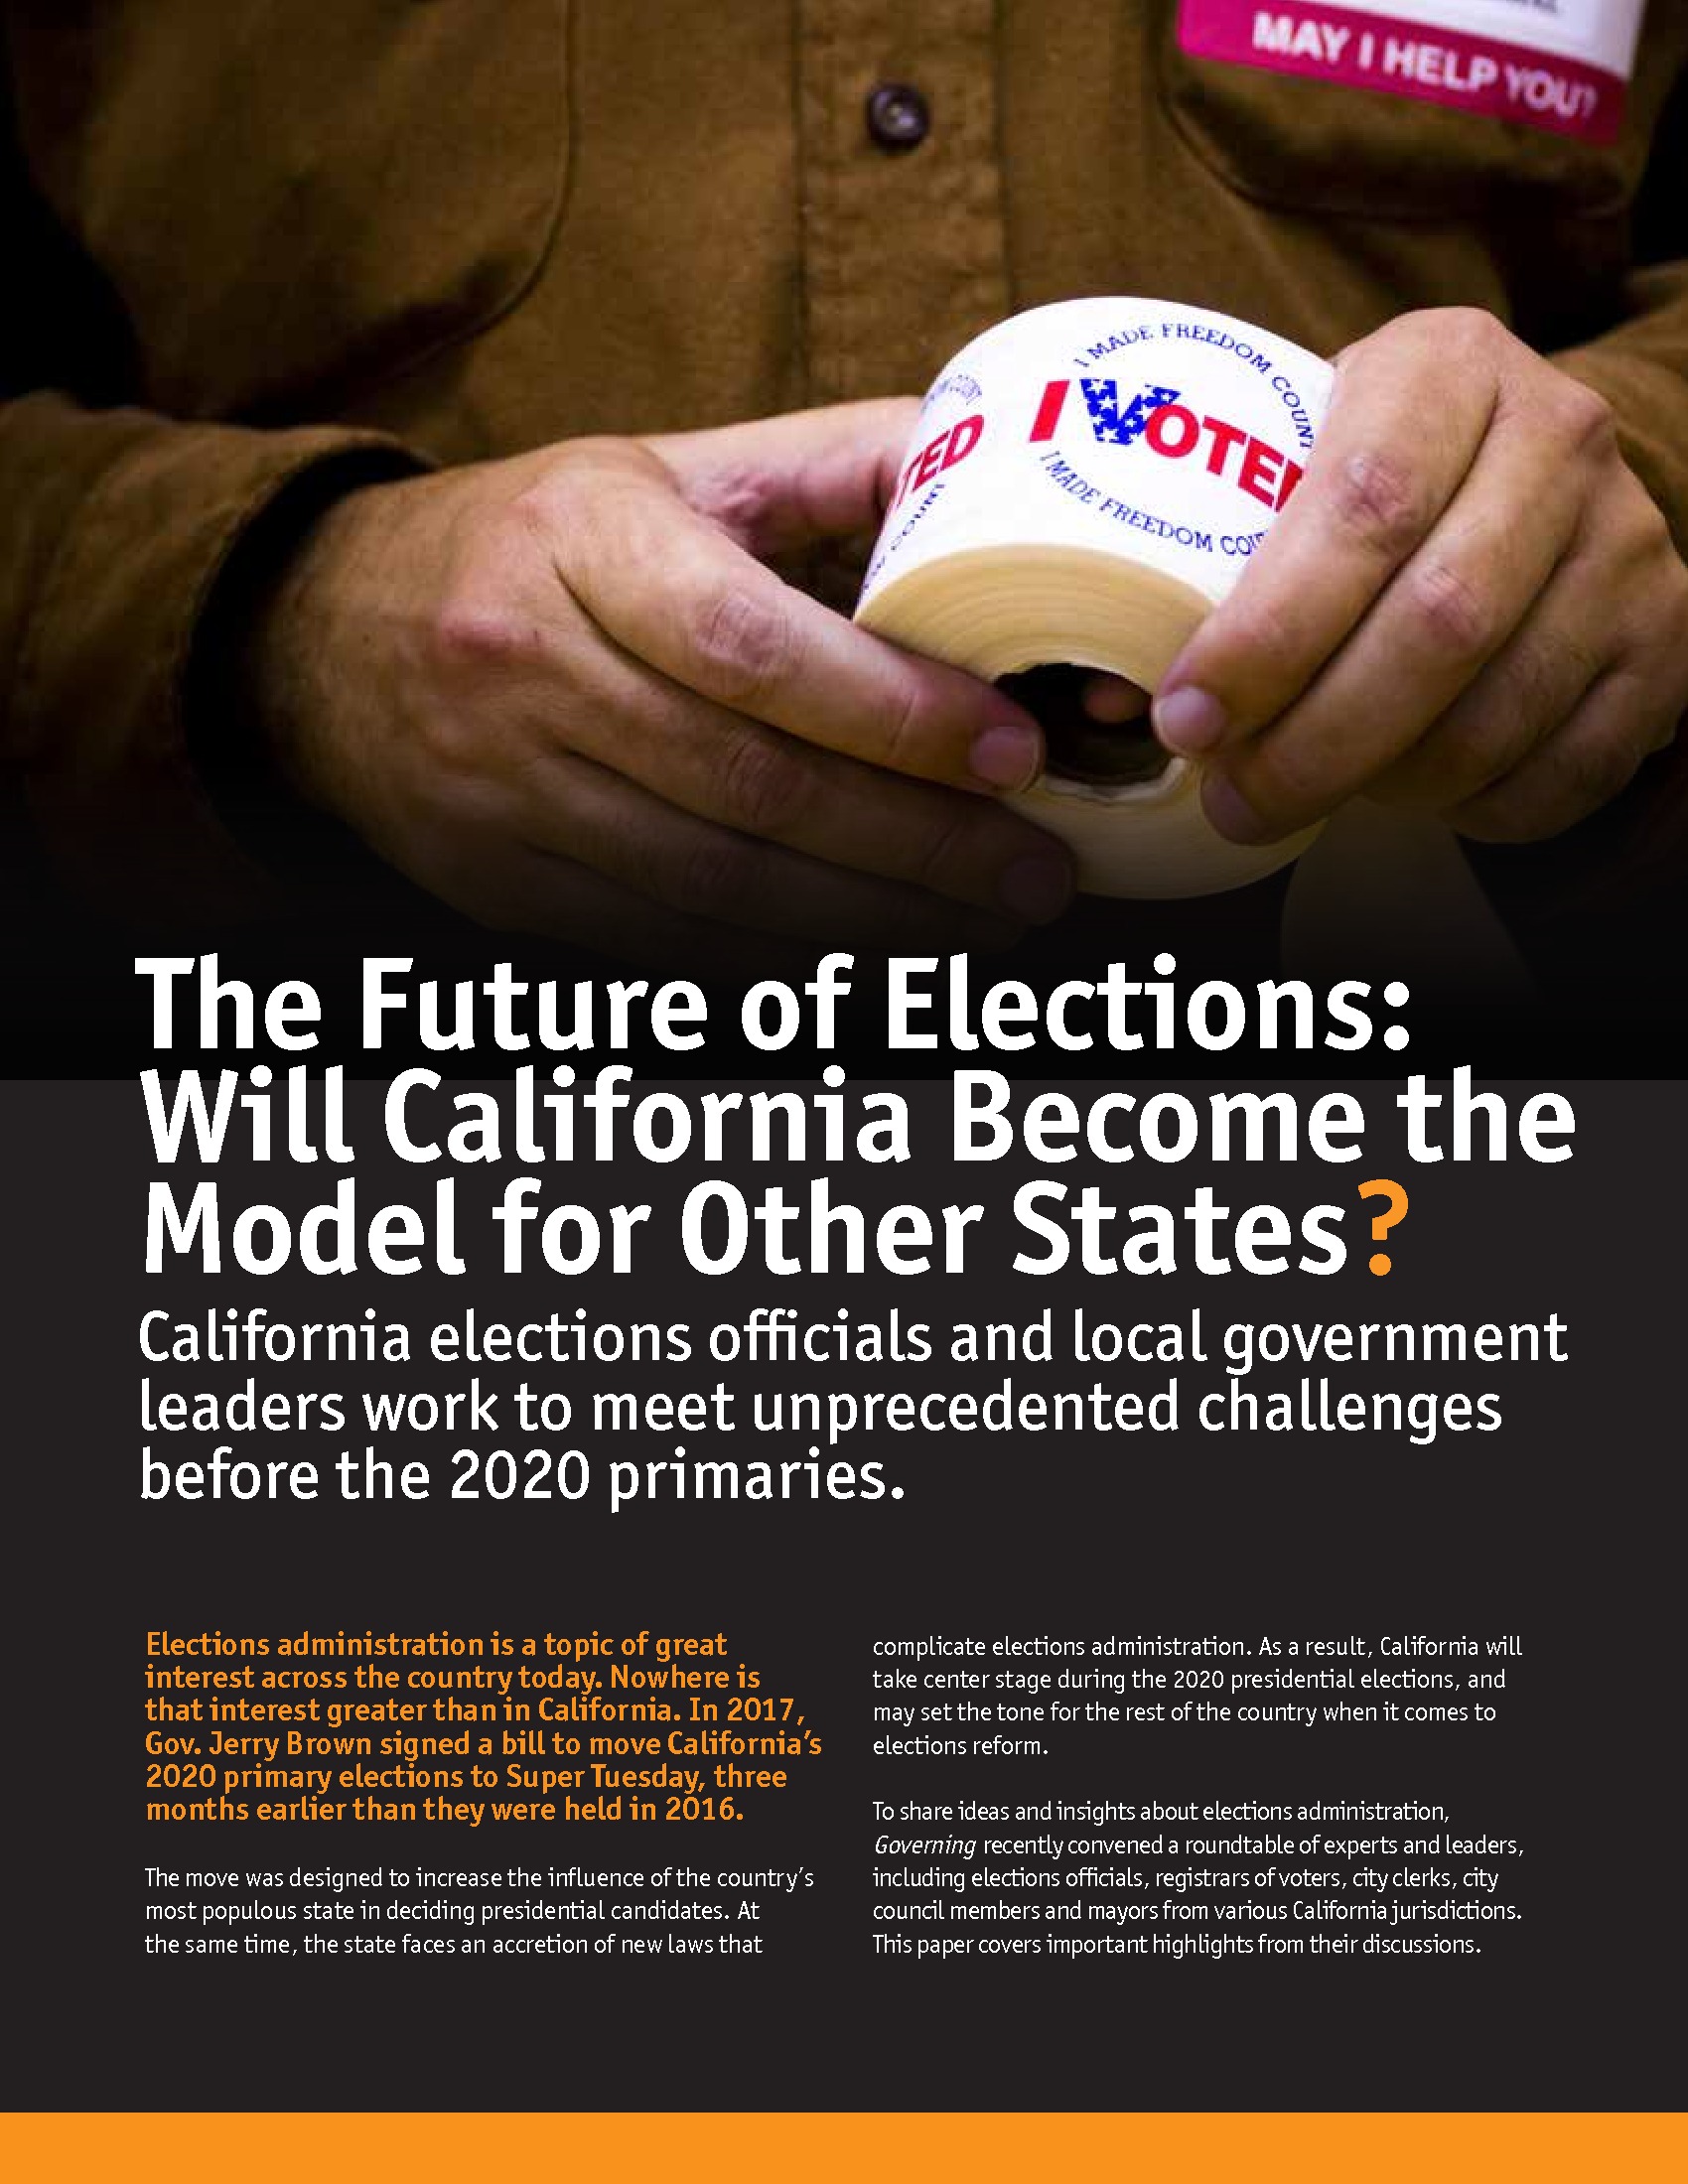 The Future of Elections: Will California Become the Model for Other States?